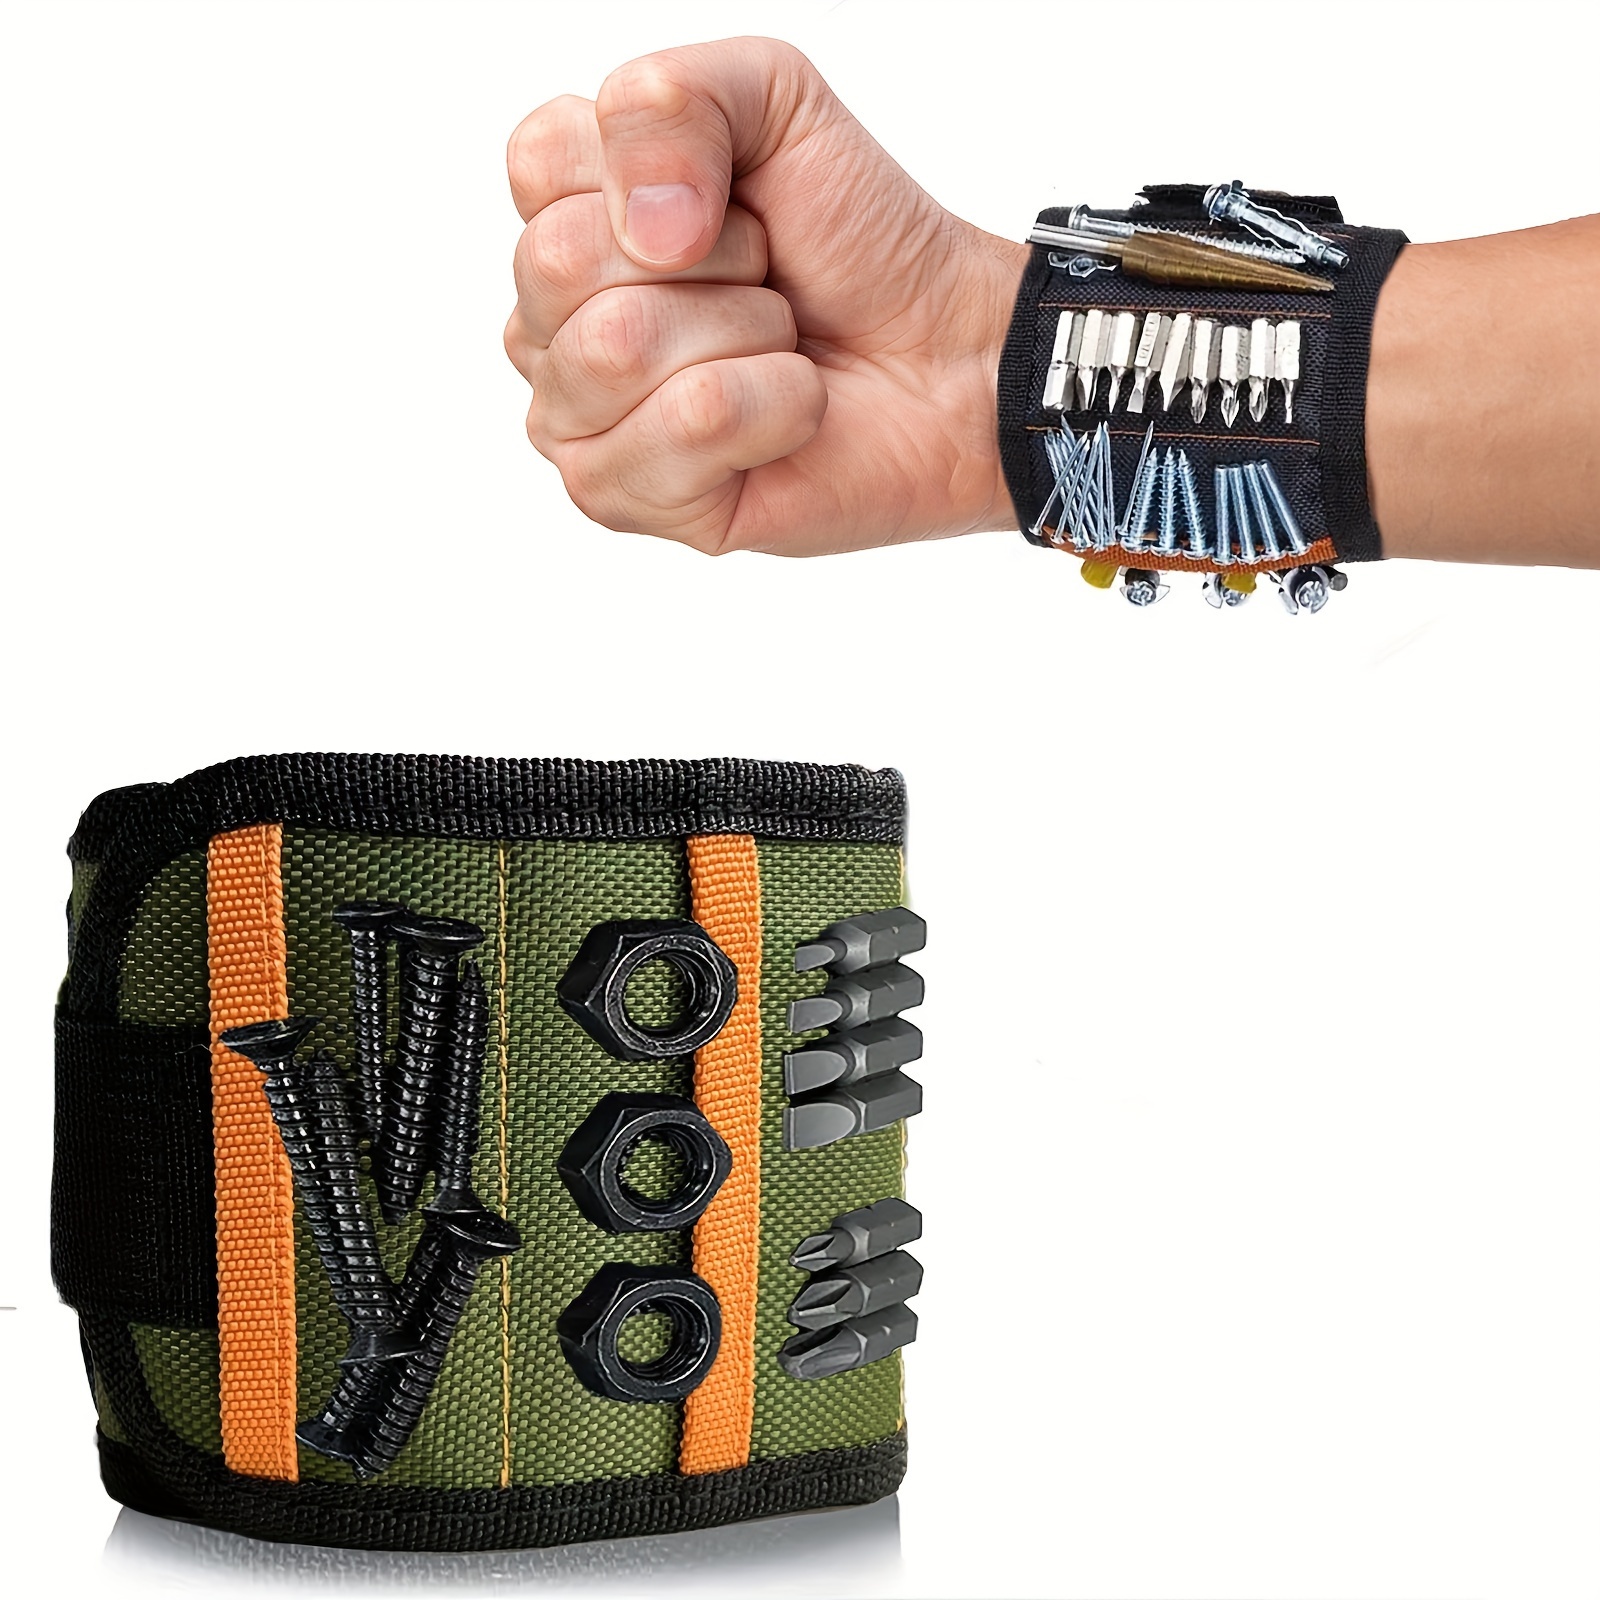 Magnetic Wristband with 15 Strong Magnets, Tool Belt Magnetic Wrist band  for Holding Screws, Nails, Drill Bits, Perfect Gifts Gadgets for Men